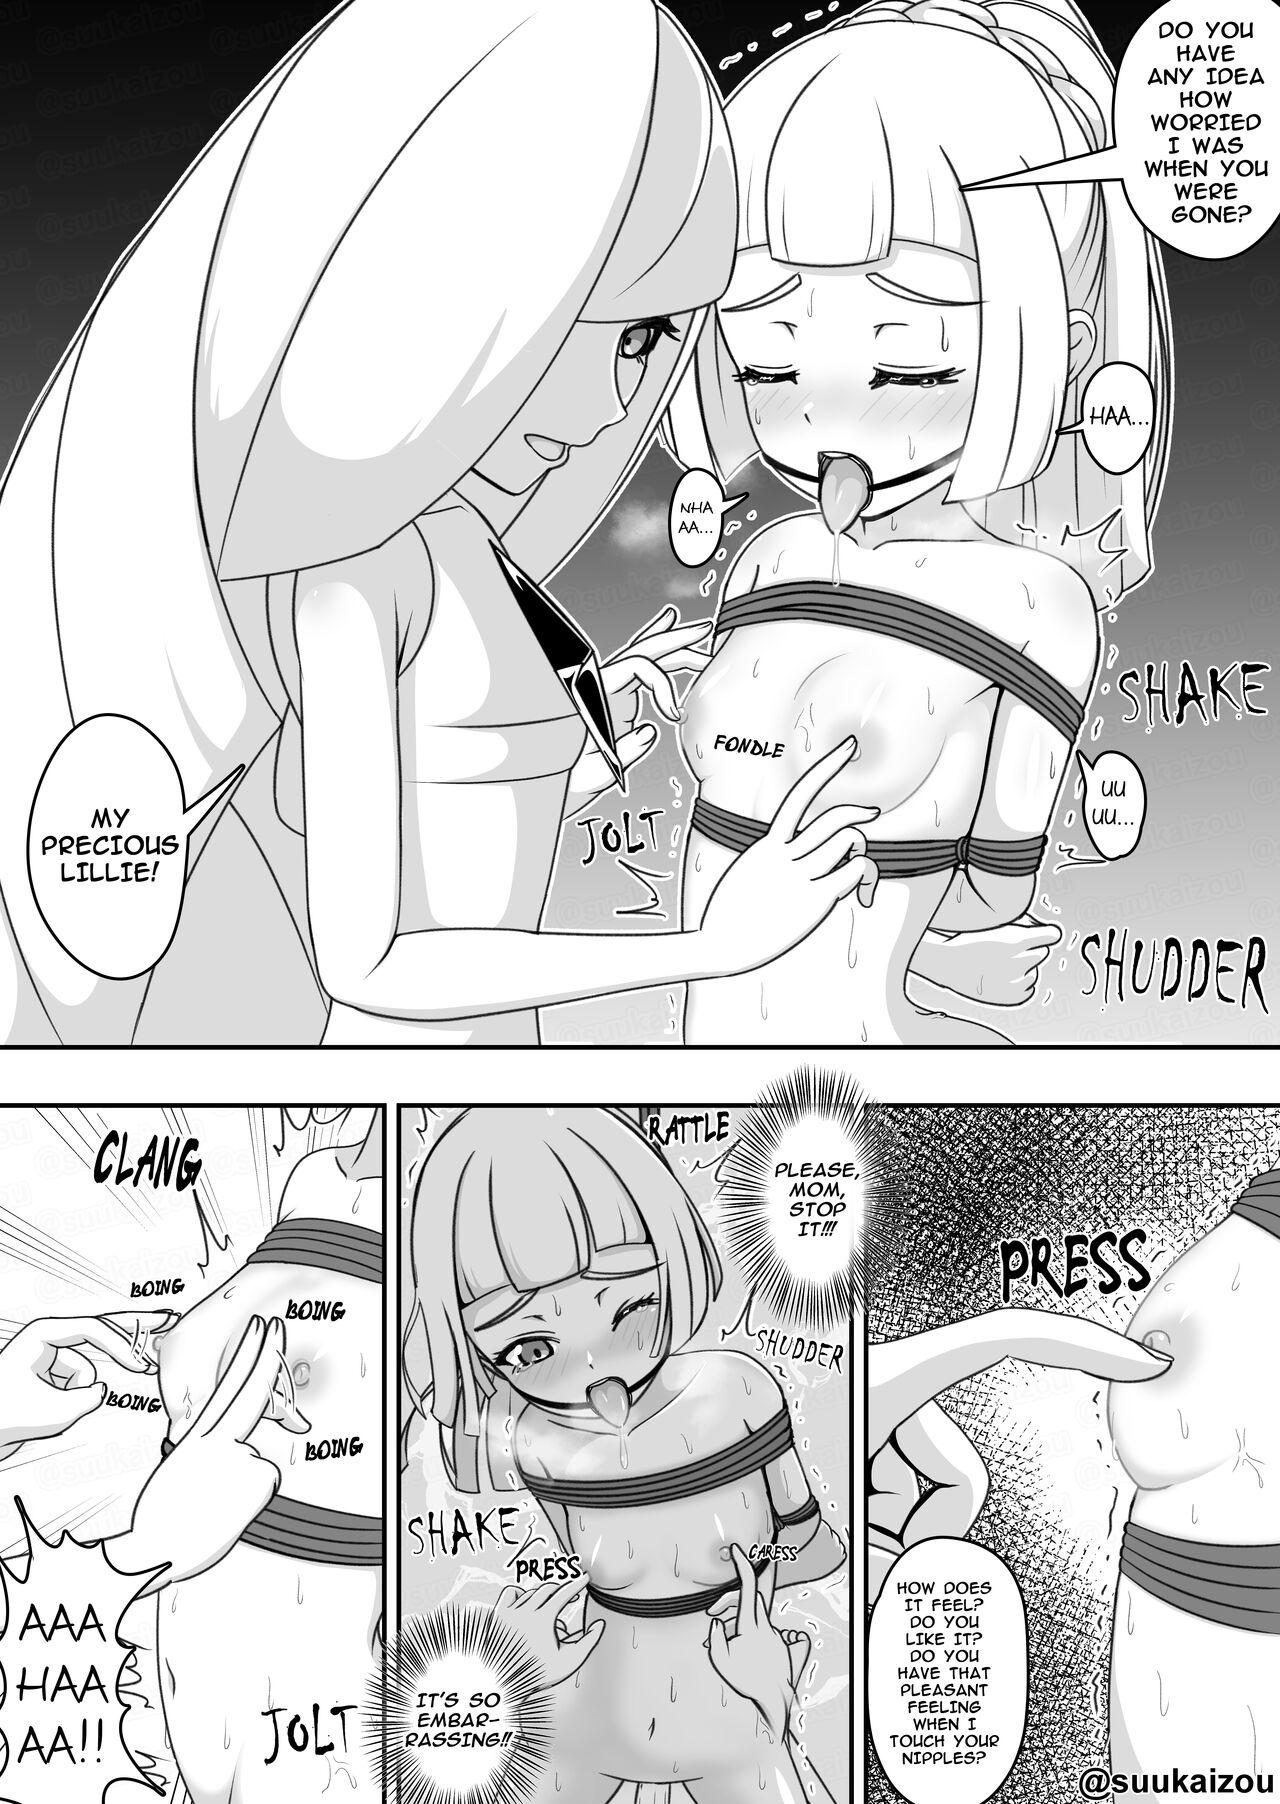 Colombia Lillie gets spanked by Lusamine. - Pokemon | pocket monsters Big Black Dick - Page 2